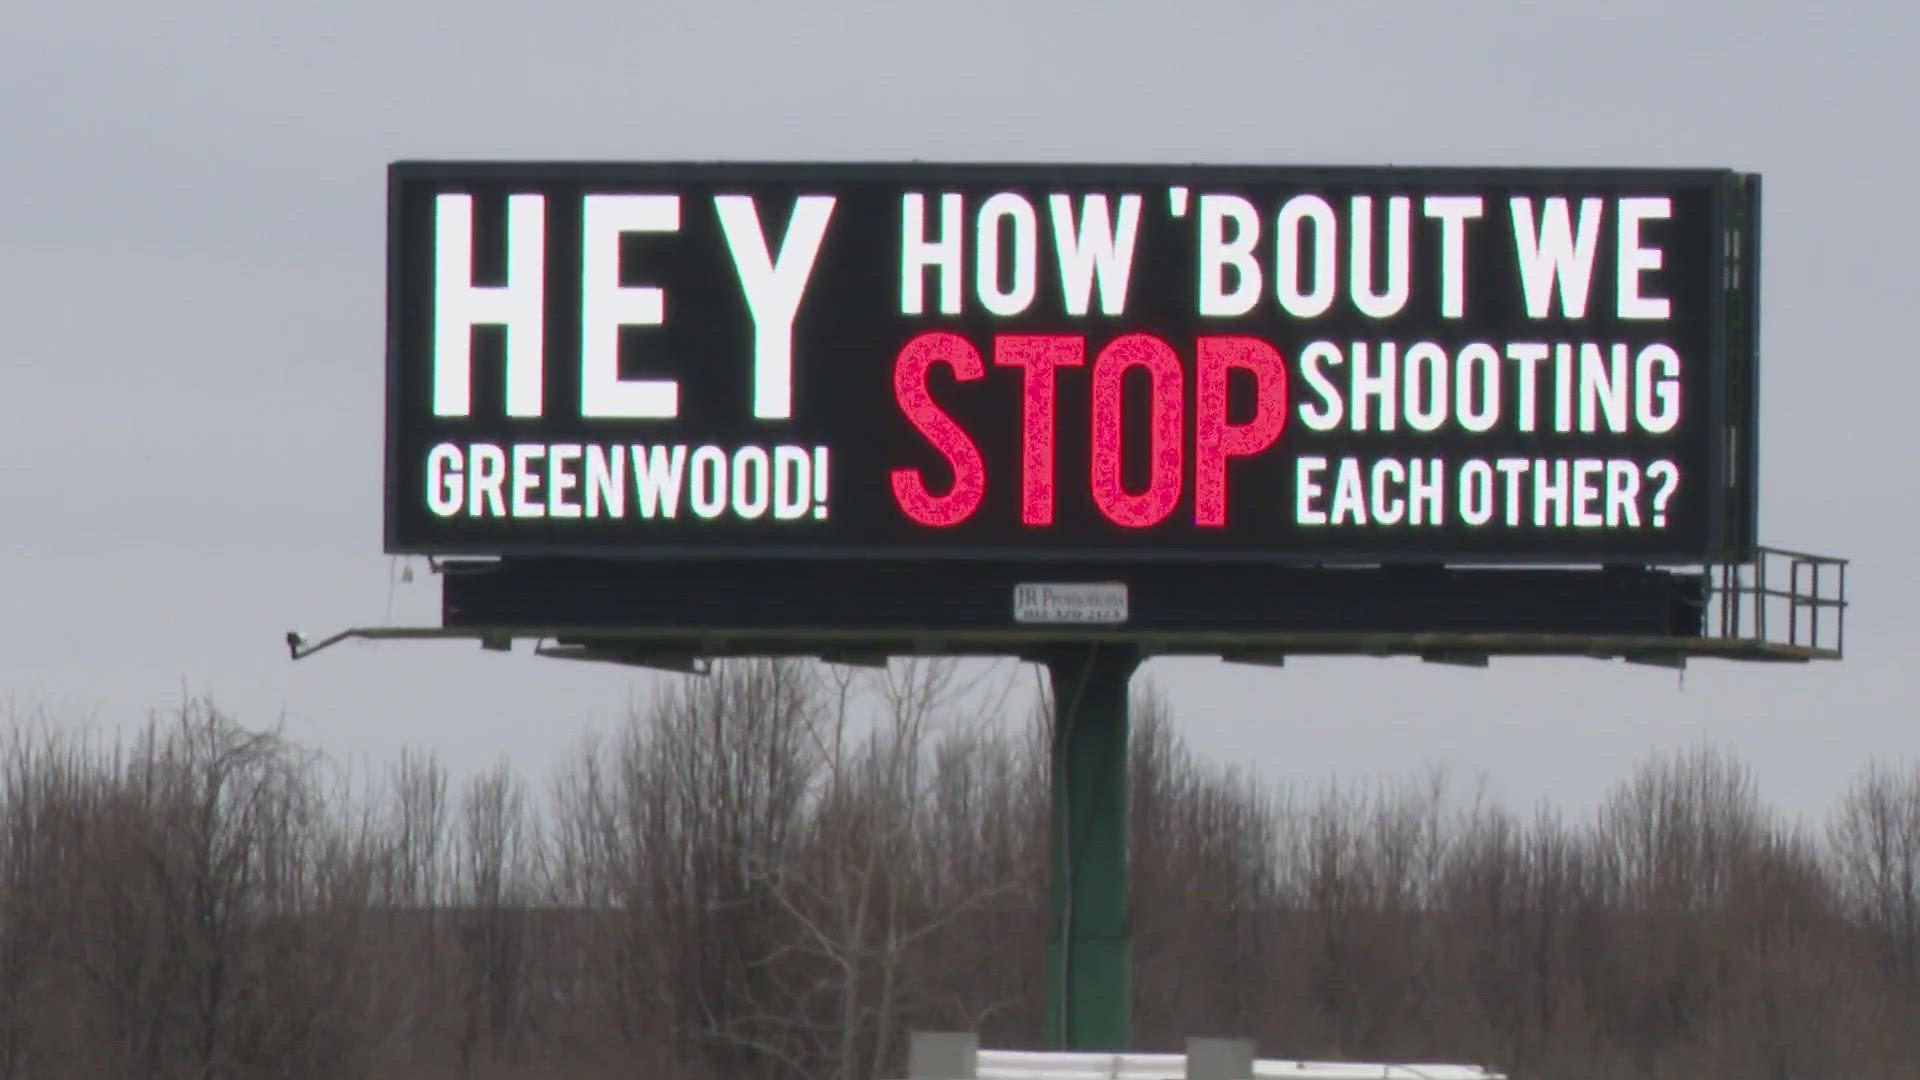 A billboard responding to a recent shooting in Greenwood got the attention of the city's mayor.